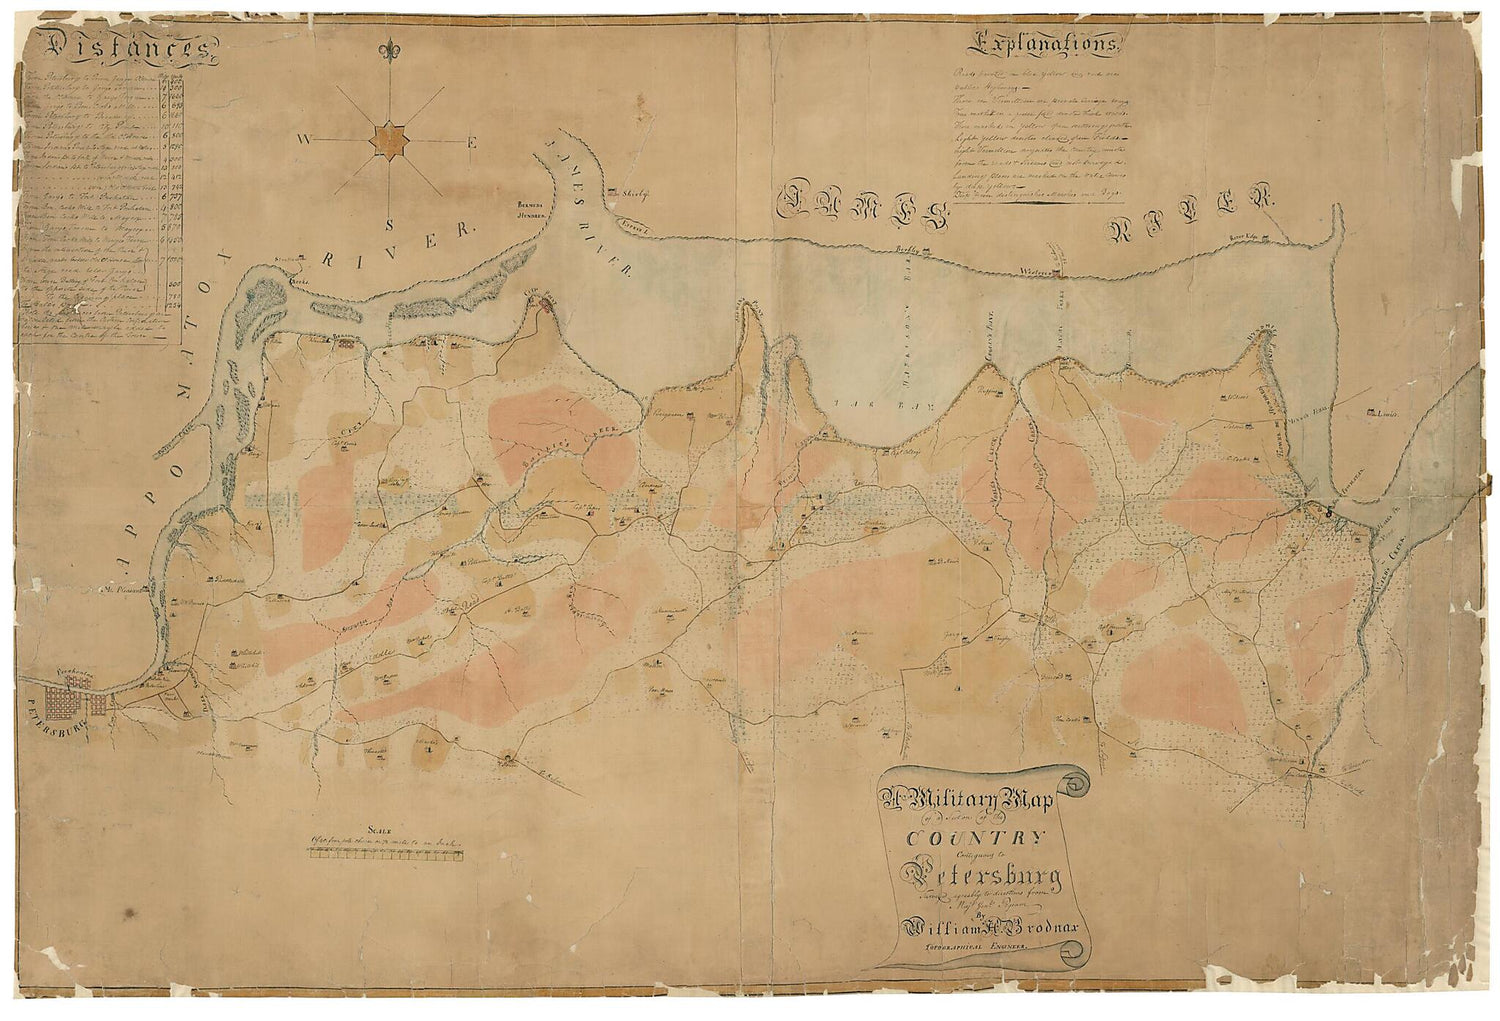 This old map of A Military Map of a Section of the Country Contiguous to Petersburg from 1864 was created by William H. Brodnax, John Pegram in 1864